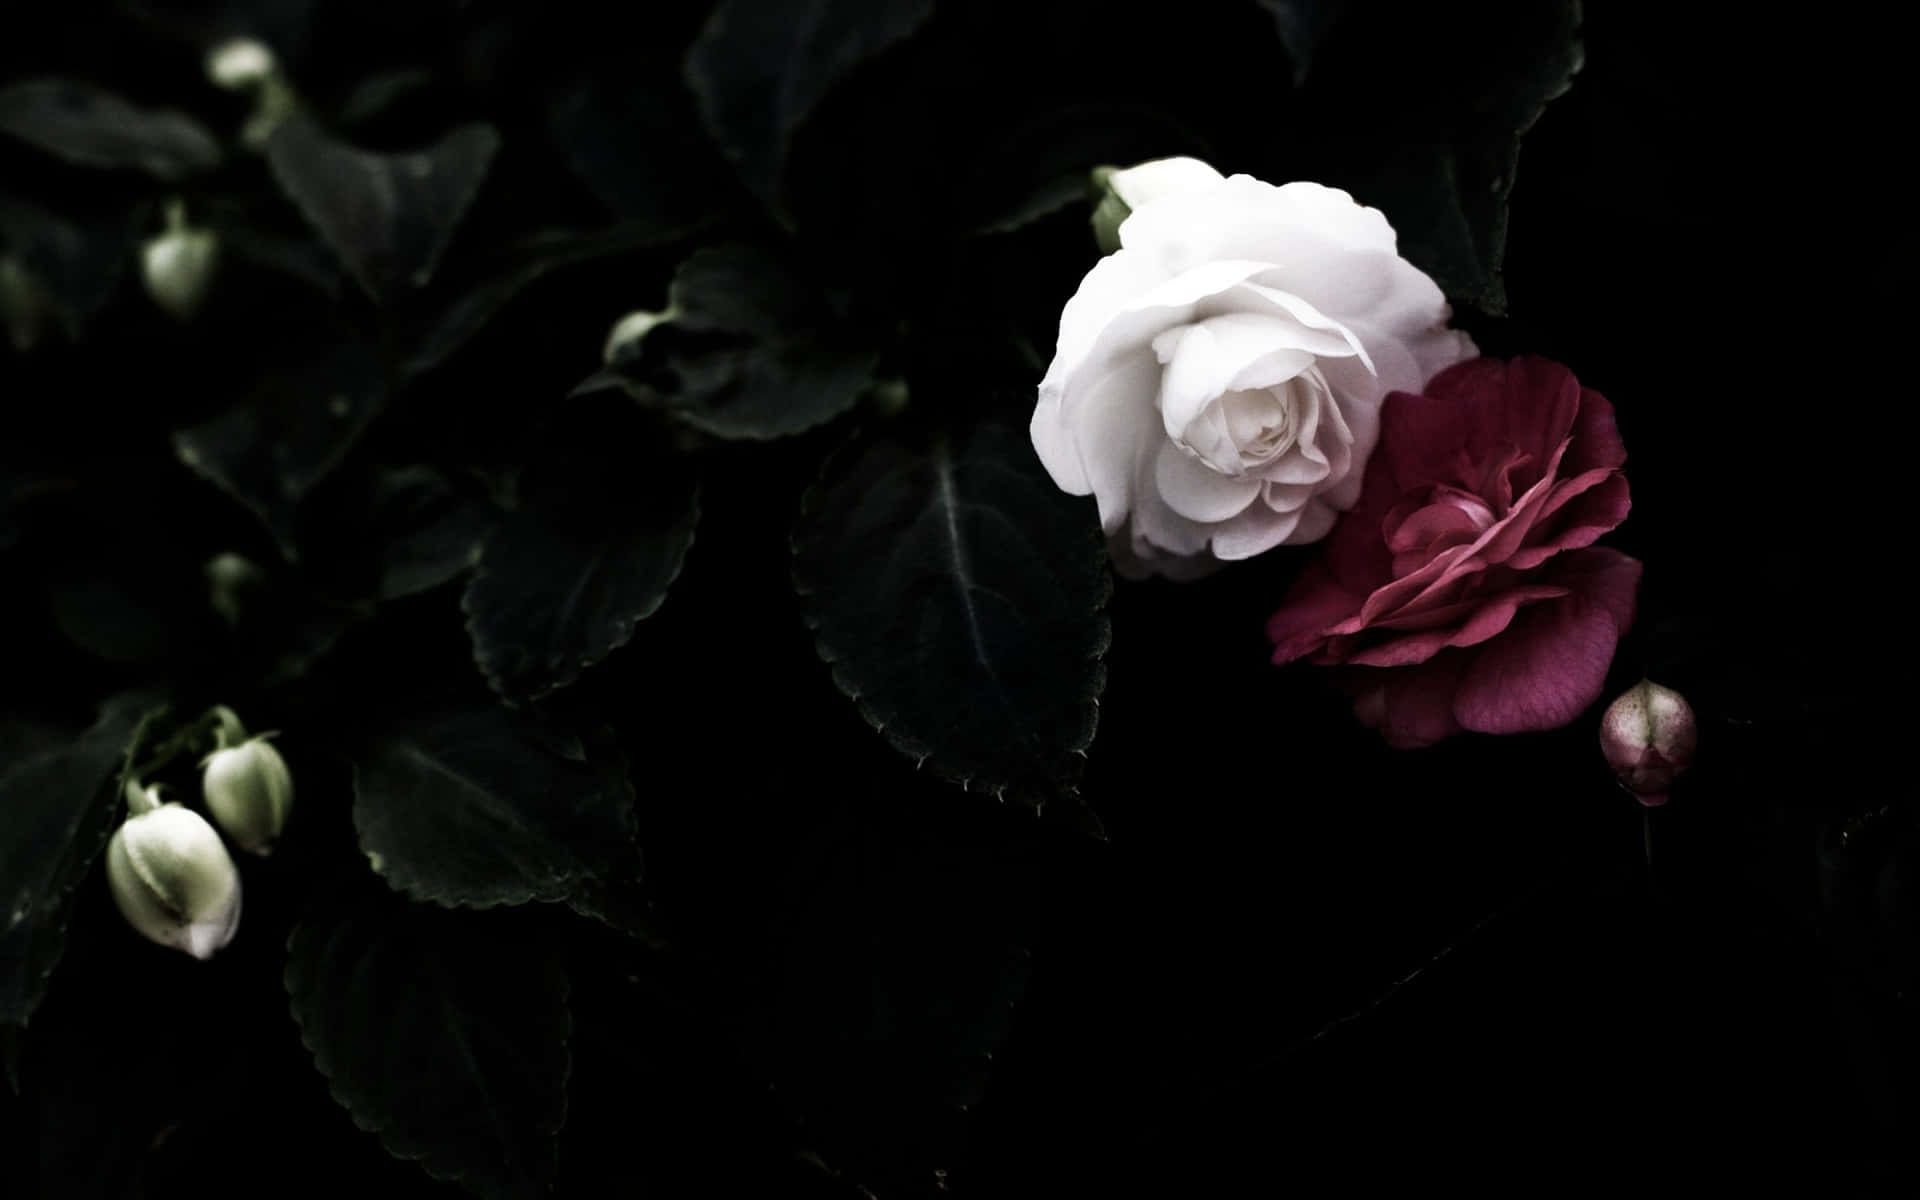 The Beauty Of A Black Rose. Background